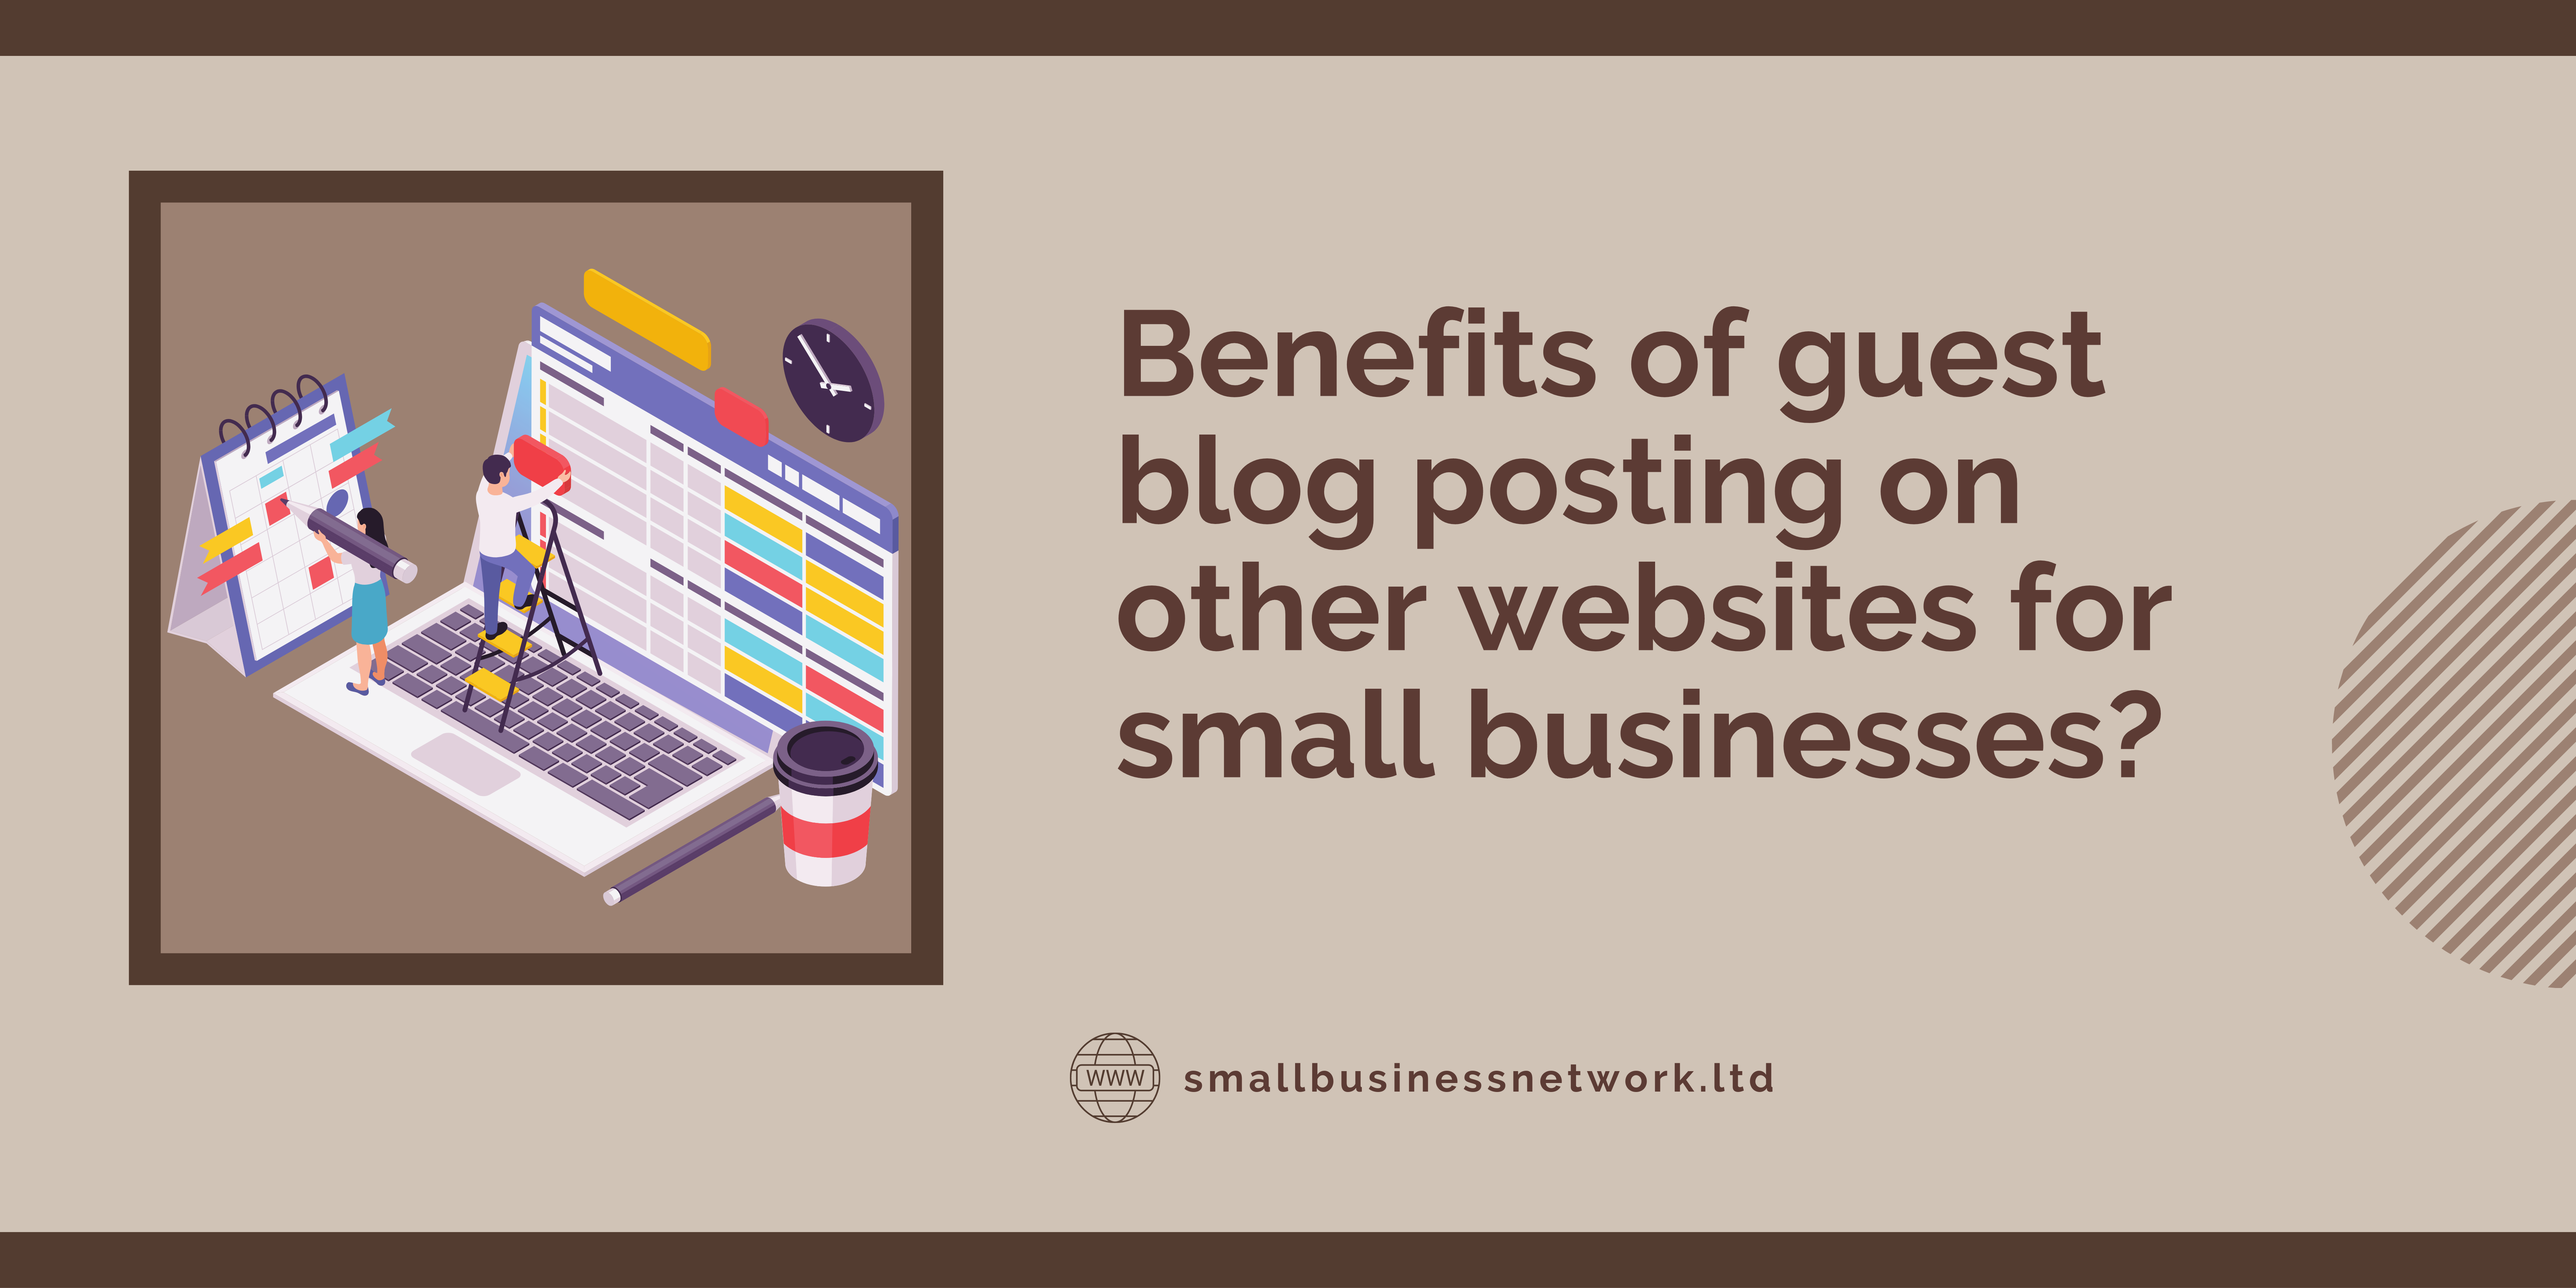 Benefits to blog posting on other websites for small businesses.